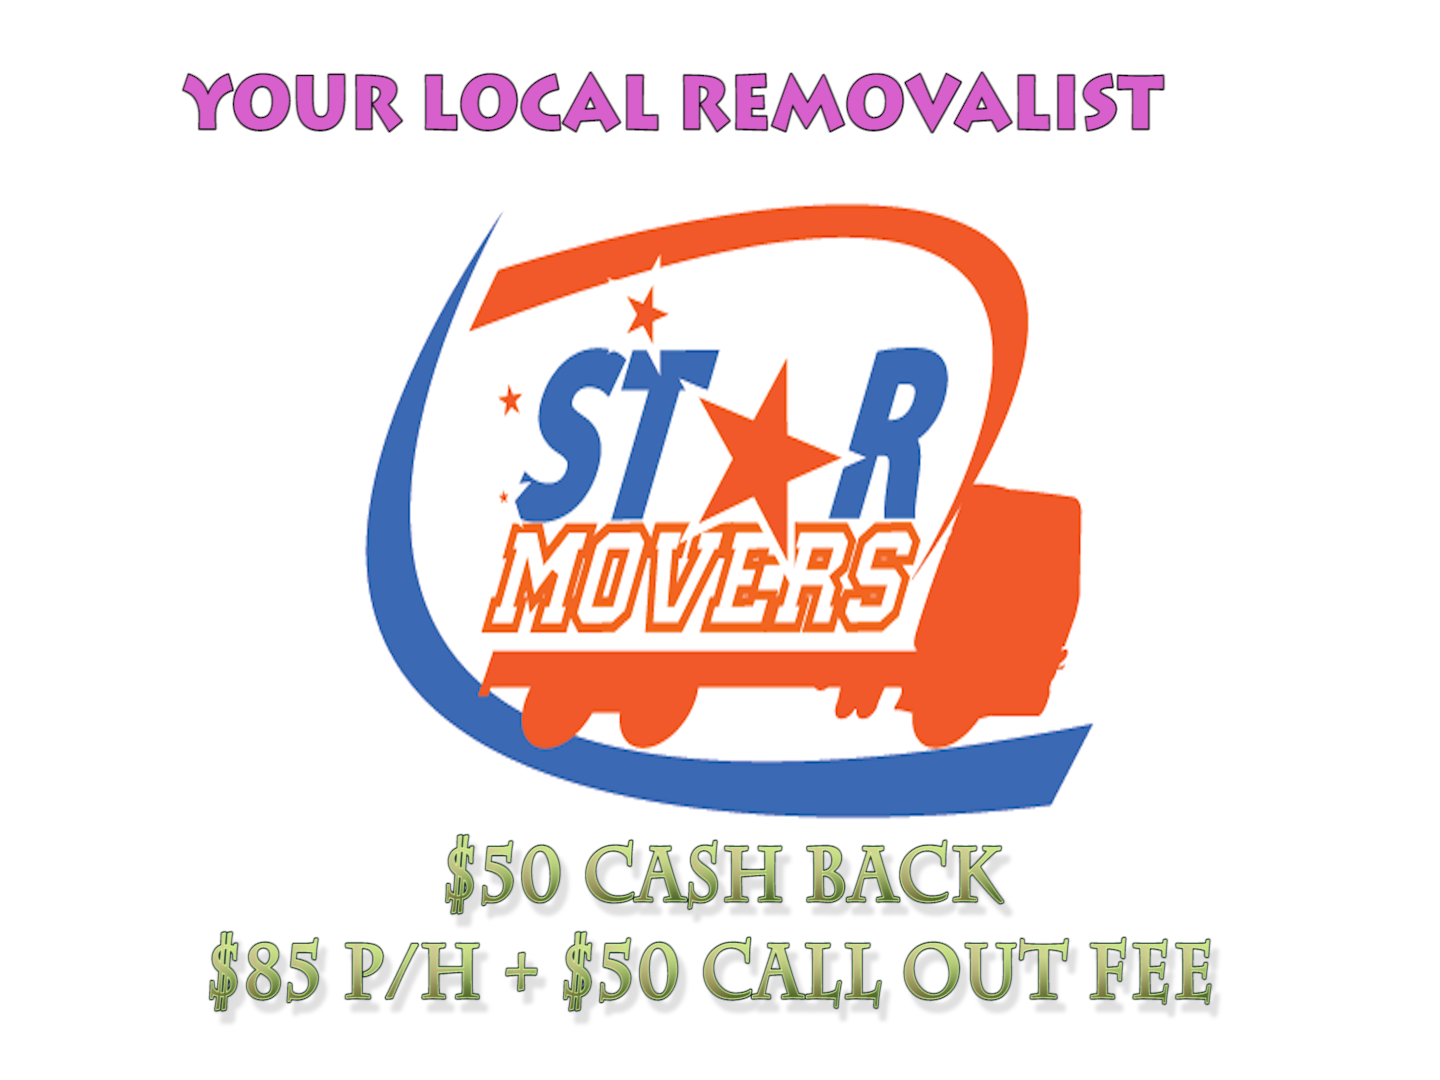 STAR MOVERS2B